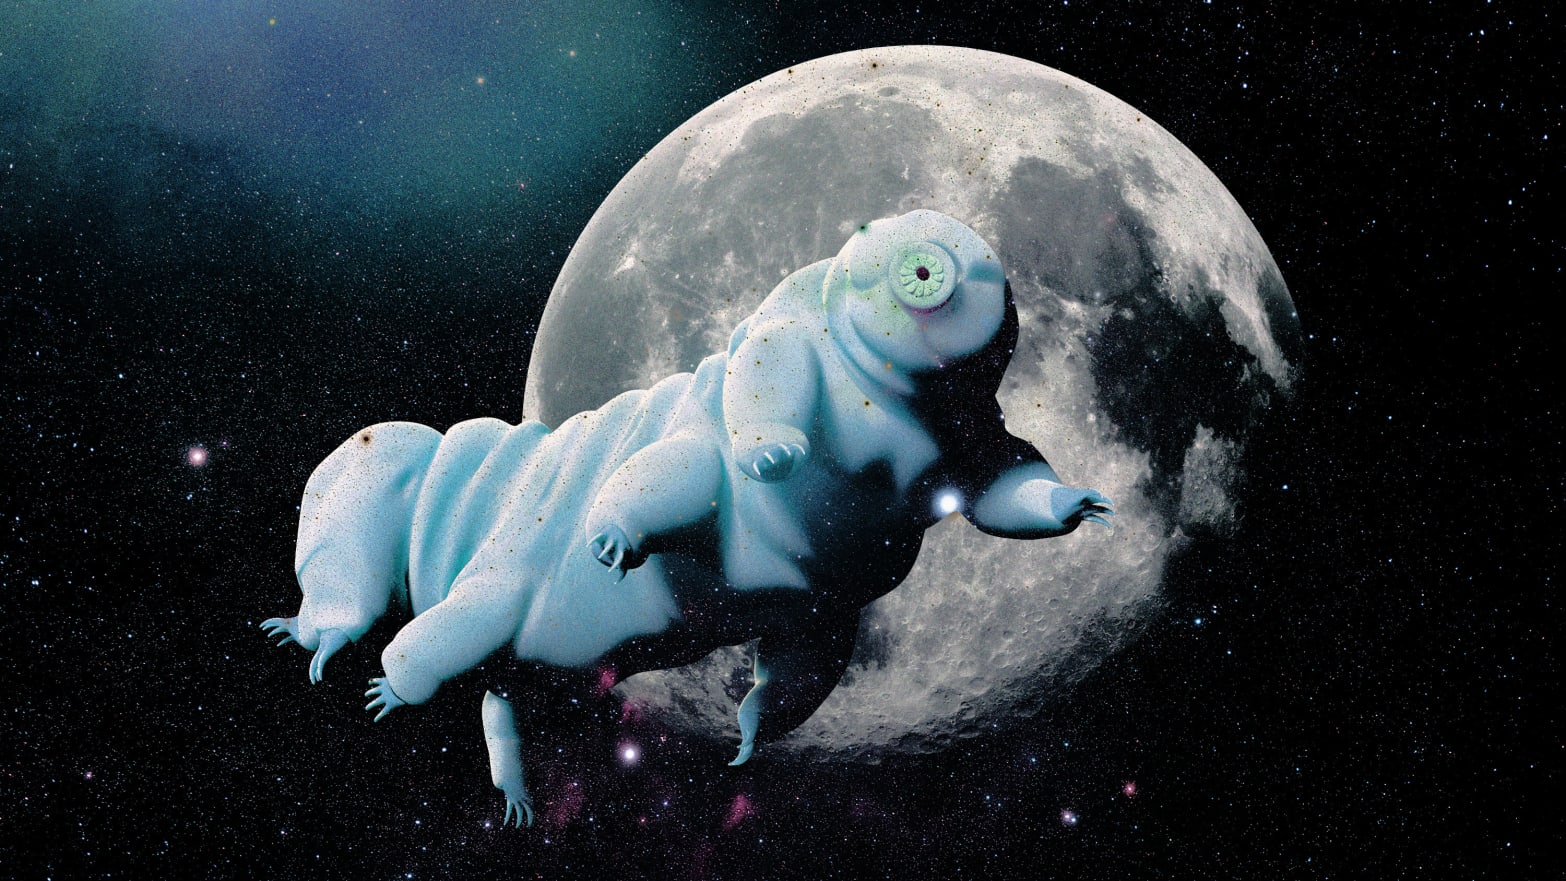 An illustration that includes images of a Tardigrades in Space surrounded by Stars, Light, and The Moon.